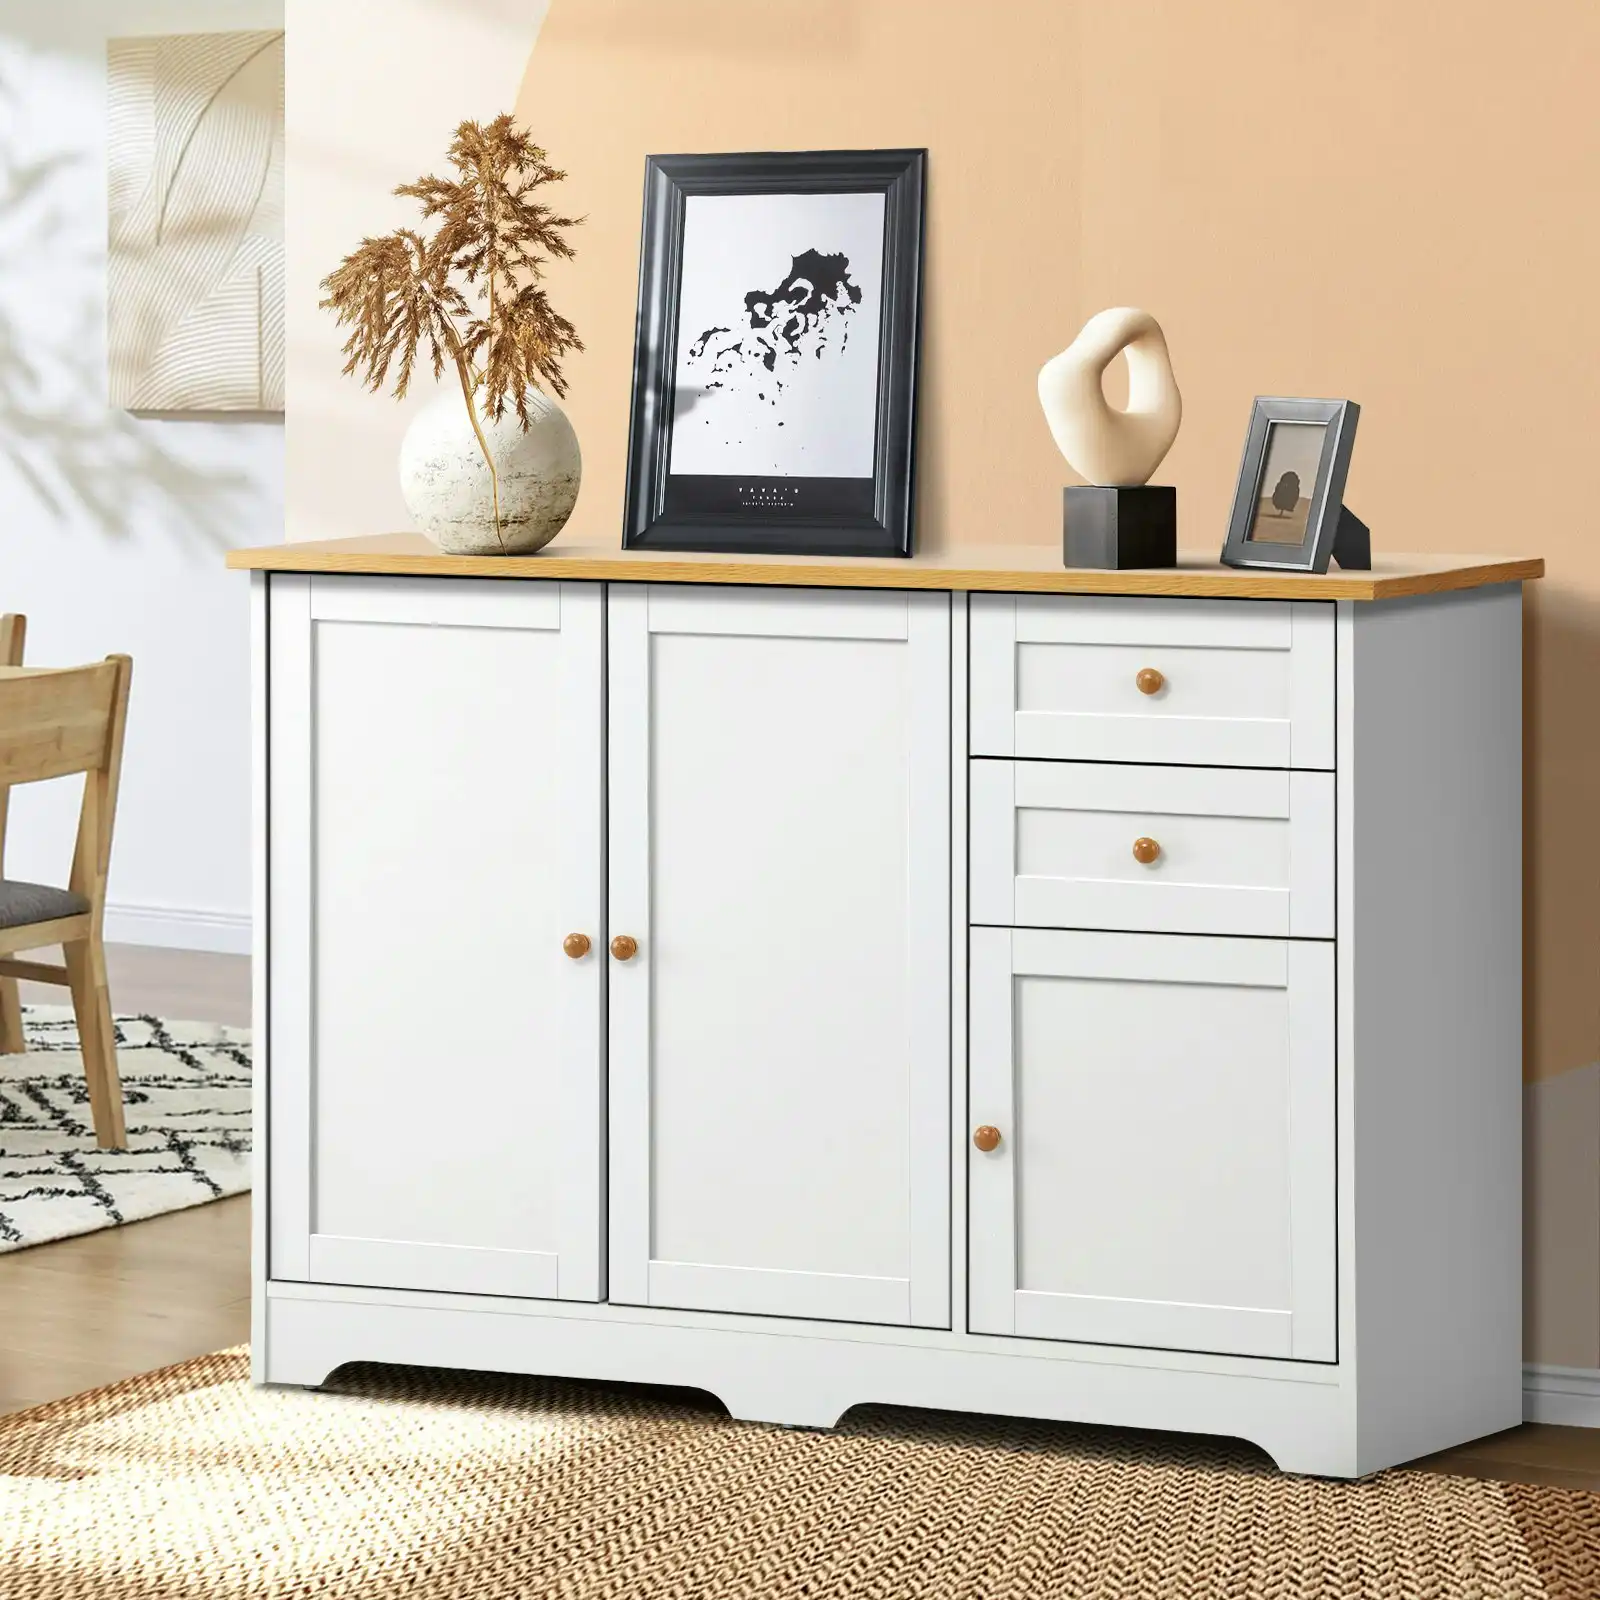 Oikiture Buffet Sideboard Storage Cabinet Cupboard Hallway Kitchen Drawers Table